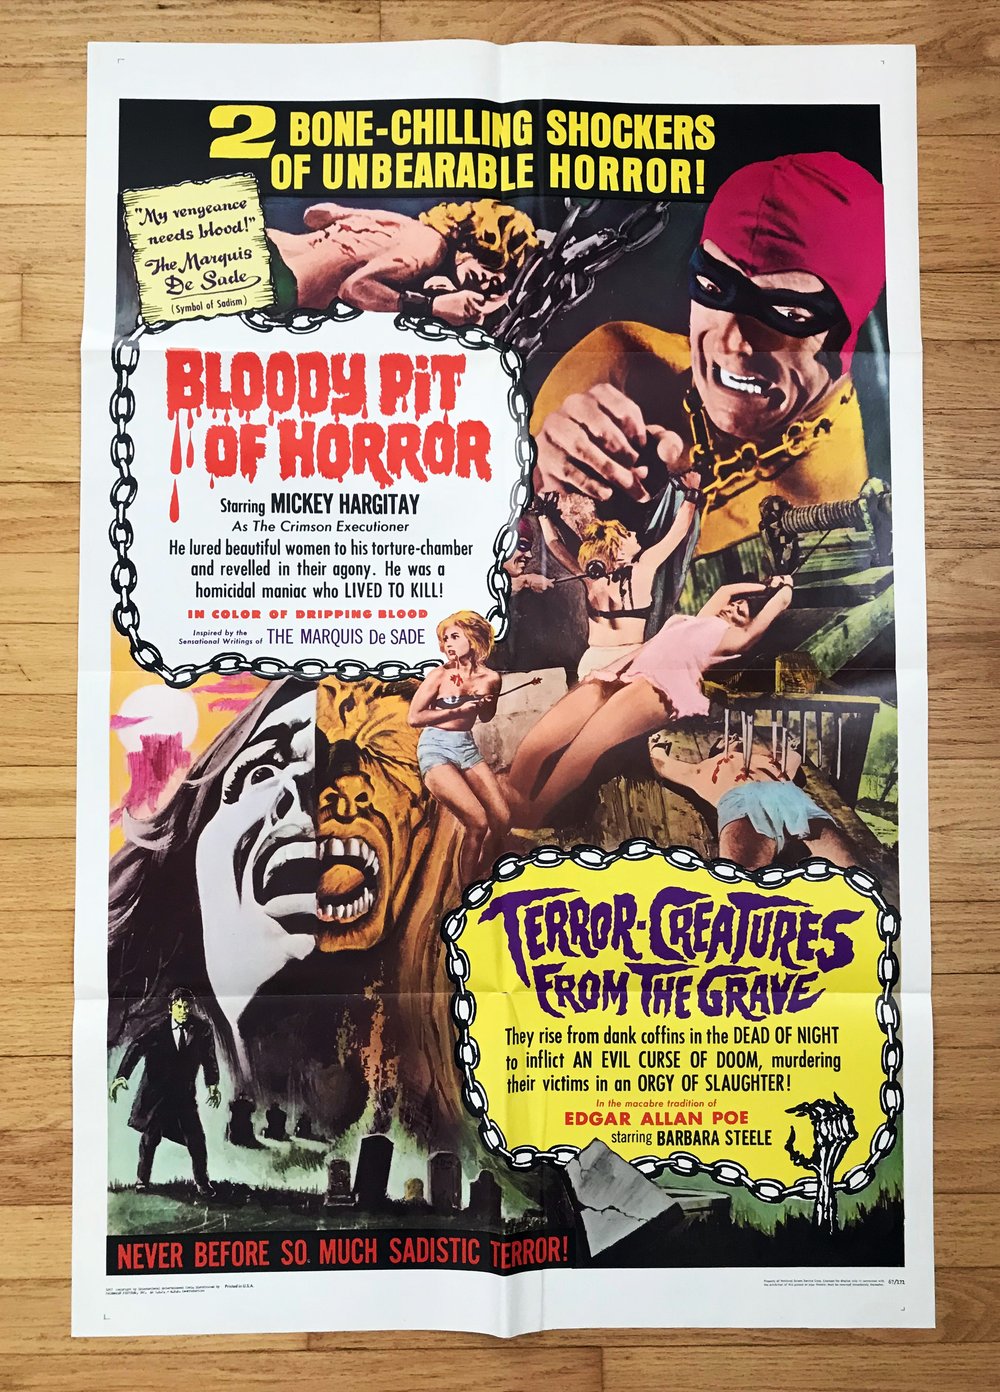 1967 BLOODY PIT OF HORROR/TERROR CREATURES FROM THE GRAVE Original U.S. Double-Bill One Sheet Poster